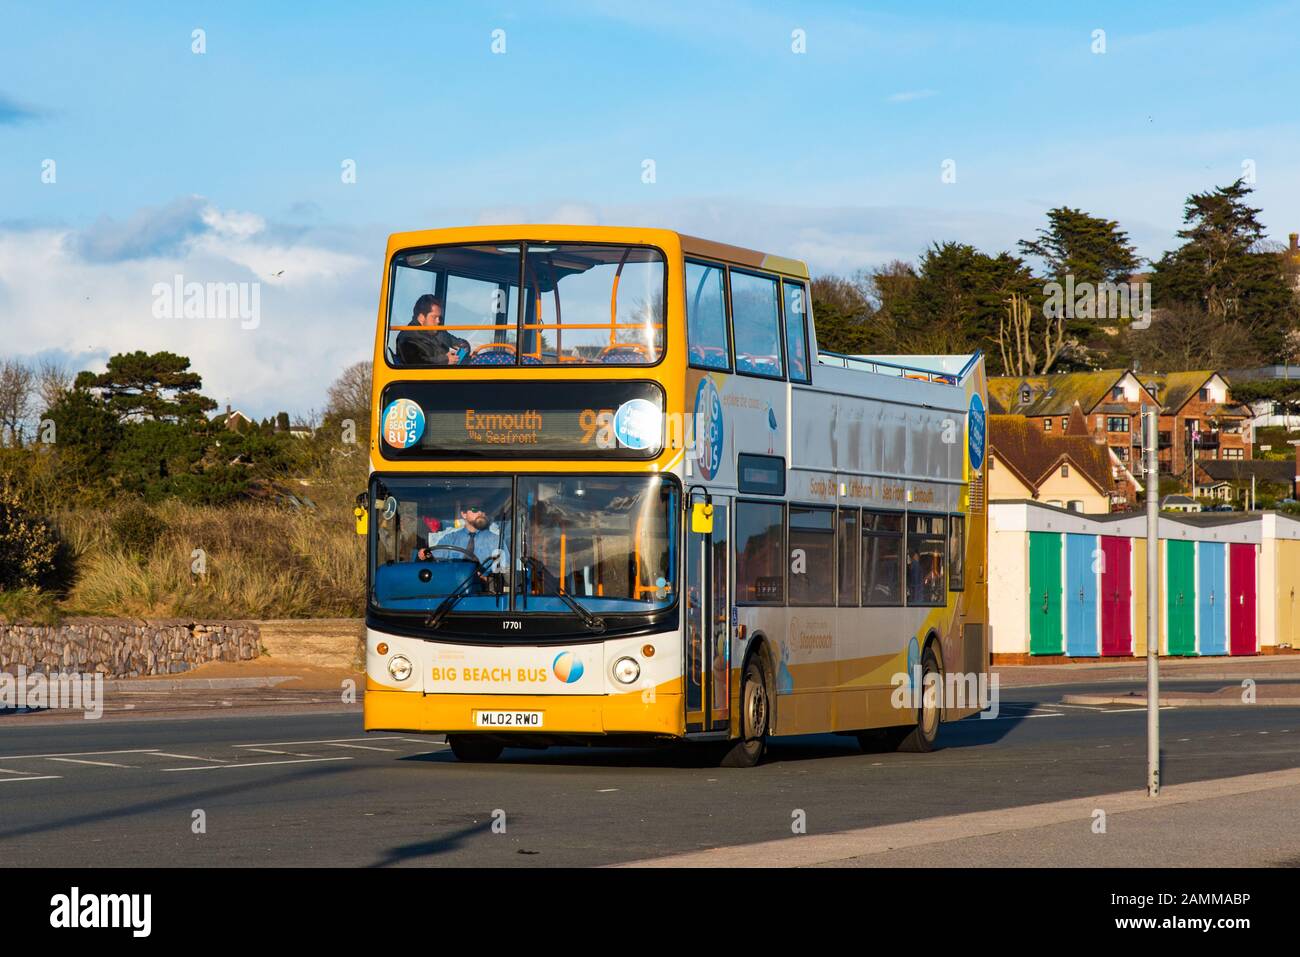 EXMOUTH, DEVON, UK - 3APR2019:  The Big Beach Bus is an open-top bus that runs between Exmouth and Devon Cliffs Holiday Park at Sandy Bay. Stock Photo